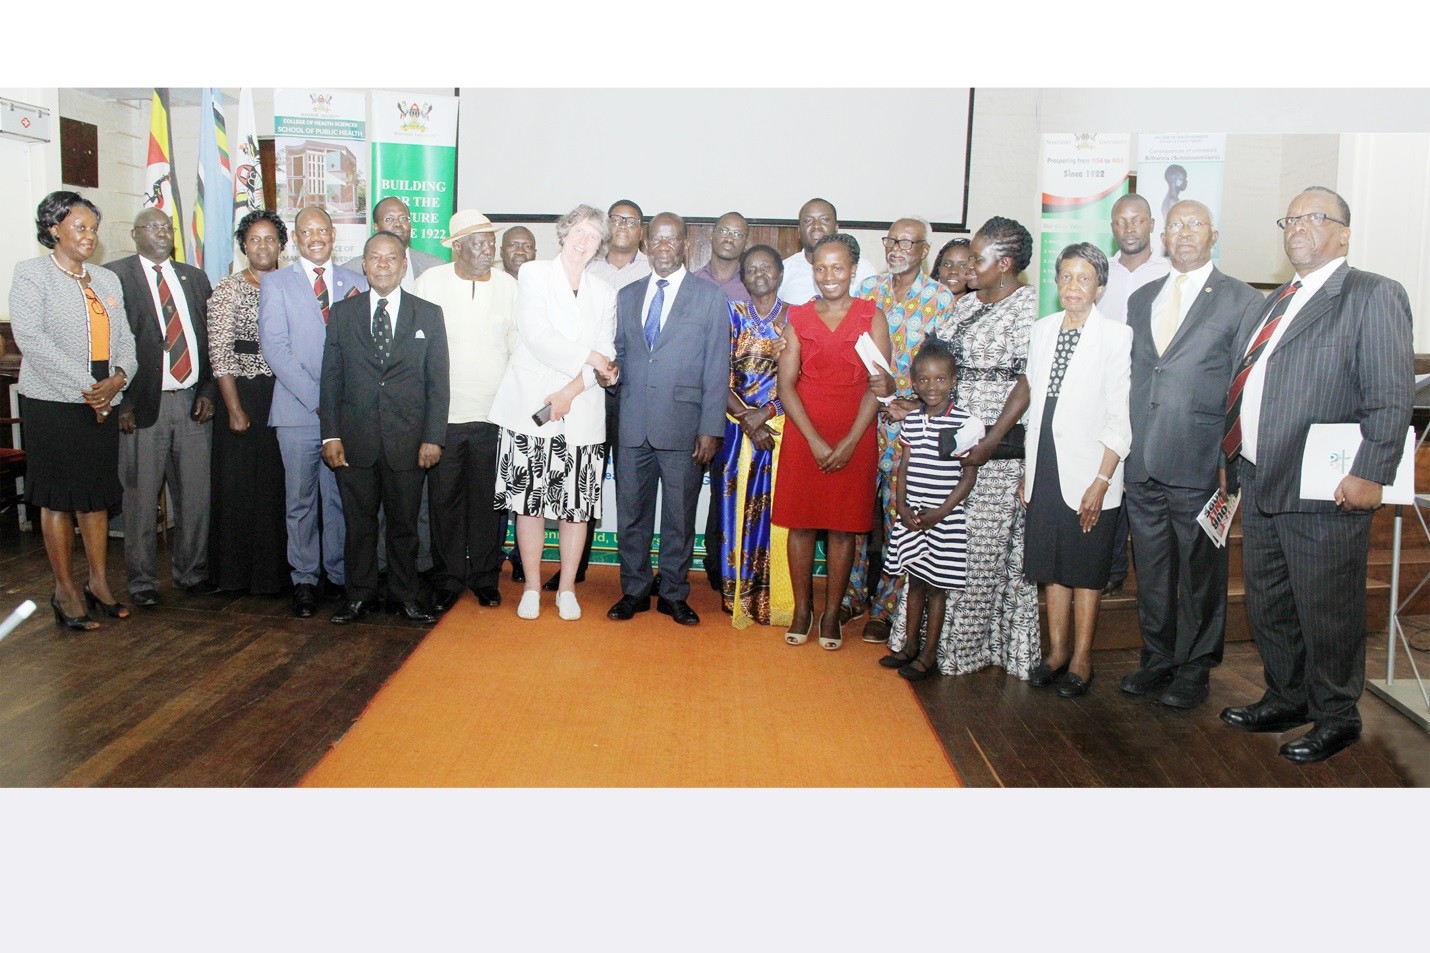 MakSPH launches Schistosomiasis/Bilharzia Campaign at the Inaugural Prof V.L Ongom Memorial Lecture